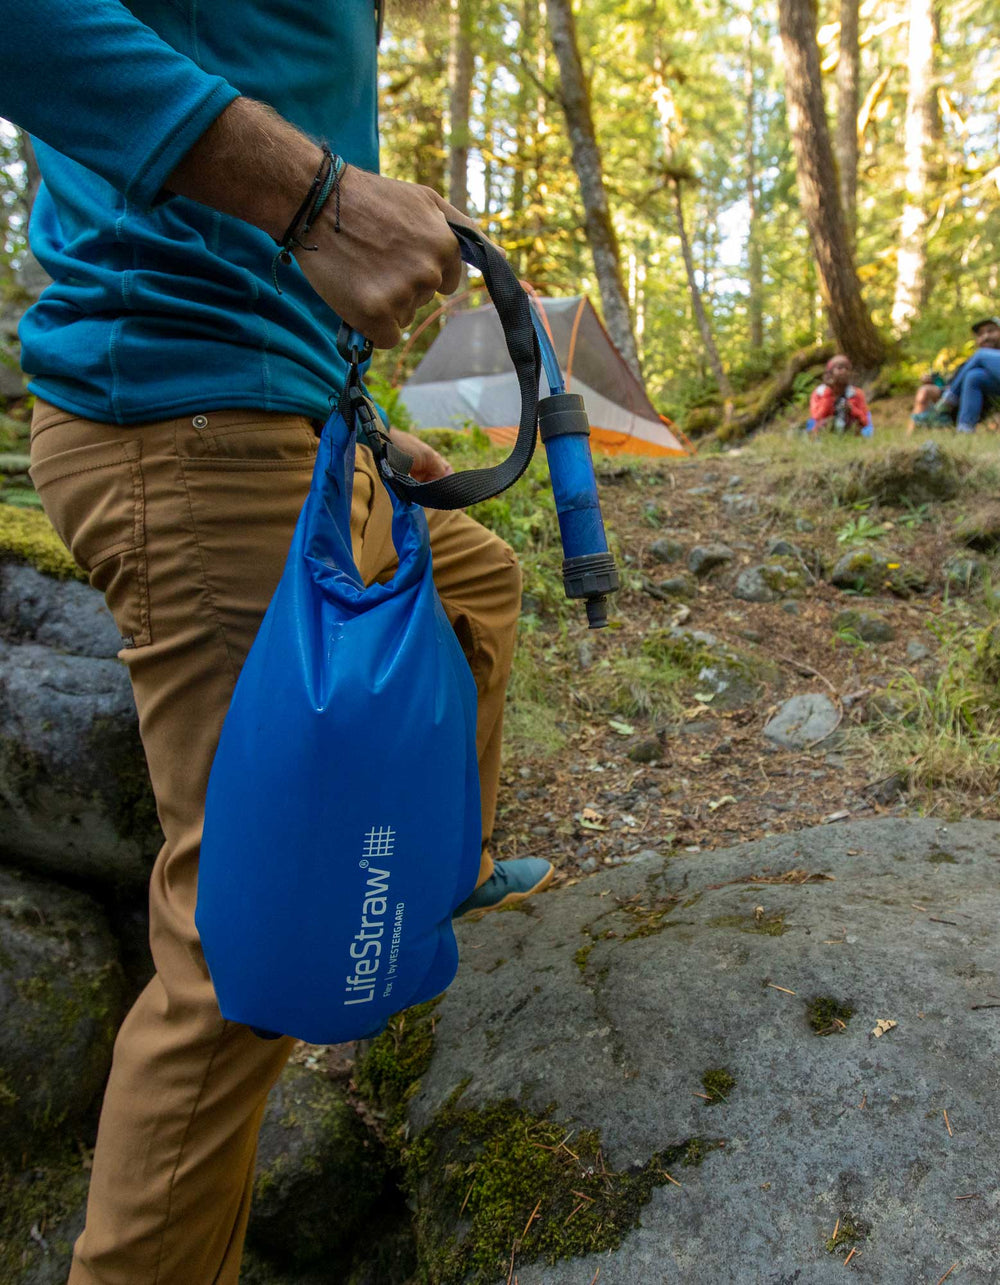 LifeStraw Flex 4-in-1 Multi-Function Water Filter System with Gravity Bag -  Walmart.com